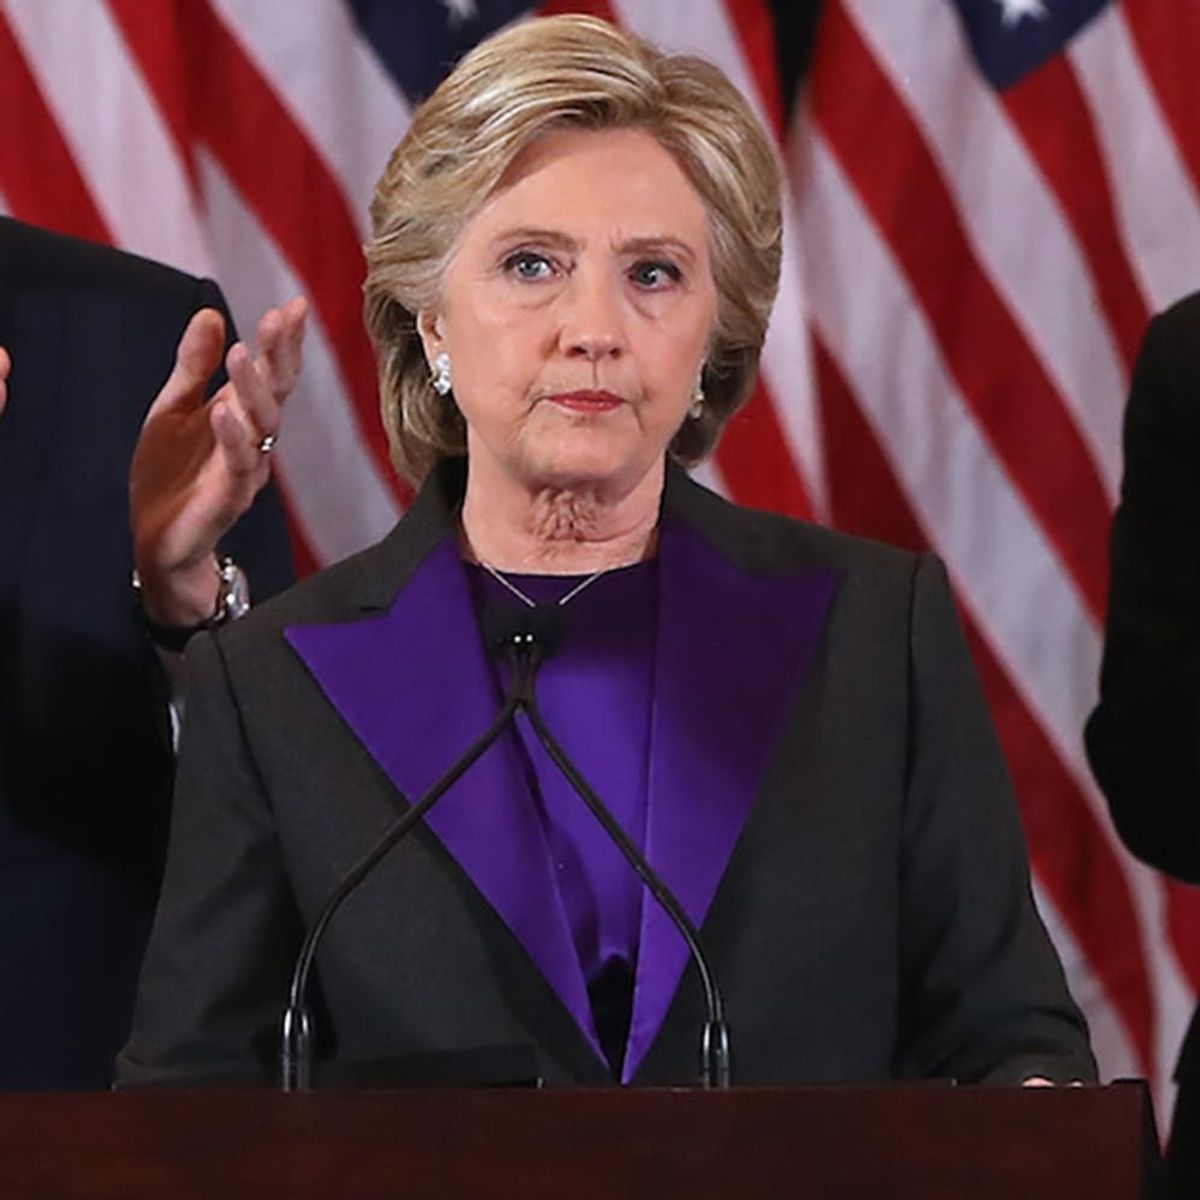 Hillary Clinton Included 2 Words in Her Concession Speech That Say What Many of Us Are Thinking